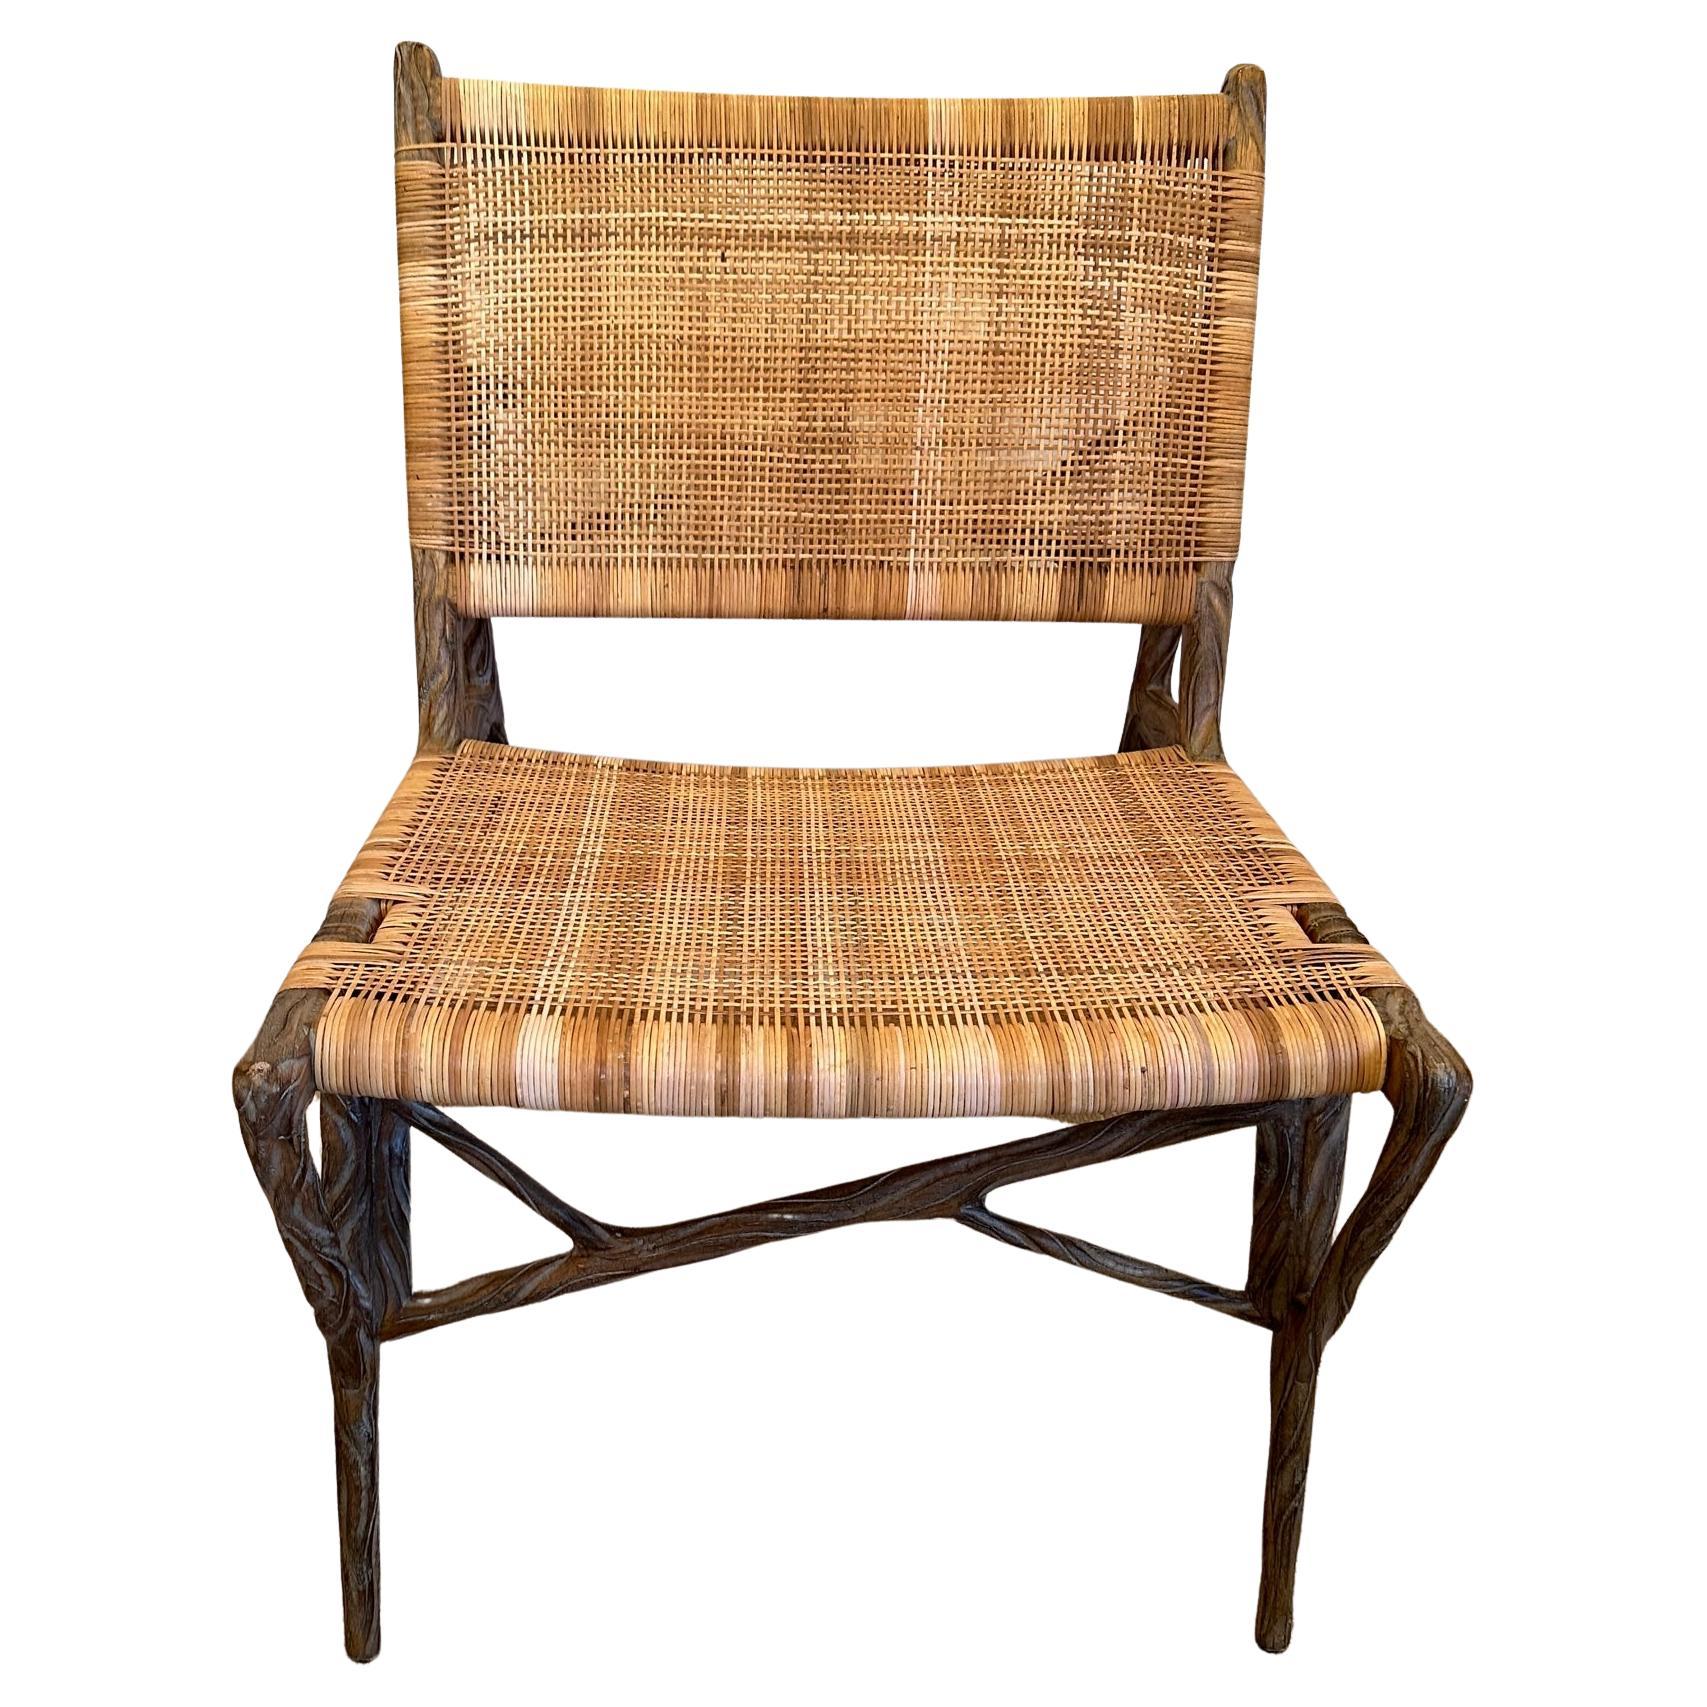 Superb Organic Modern Faux Twig and Woven Rattan Chair For Sale